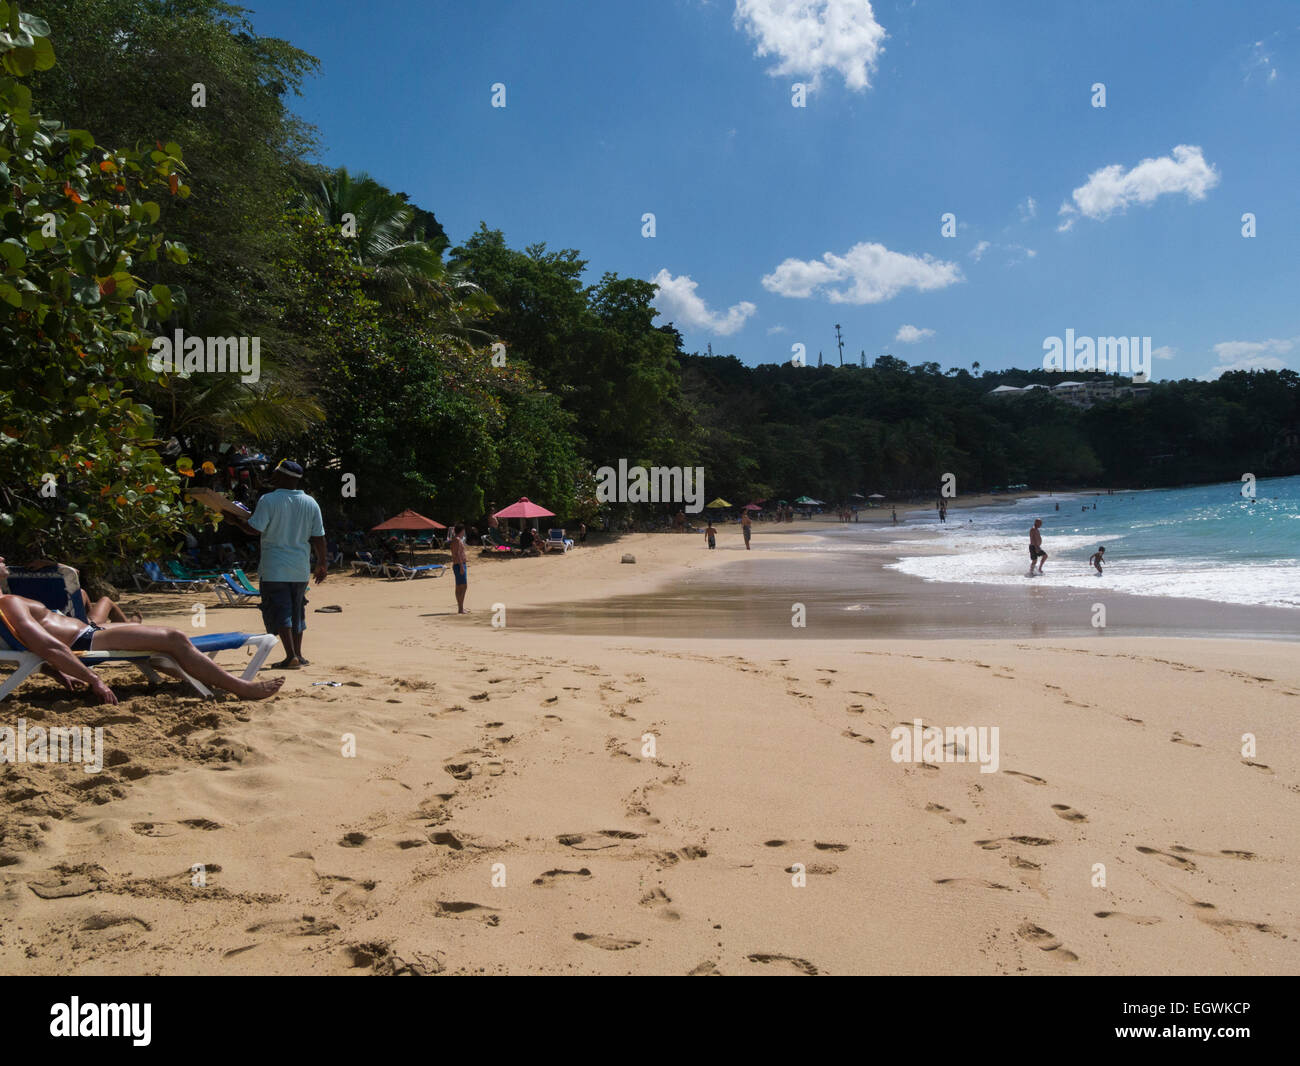 View along the popular public beach of Playa de Sosua Dominican Republic people holidaying on lovely winter day Stock Photo